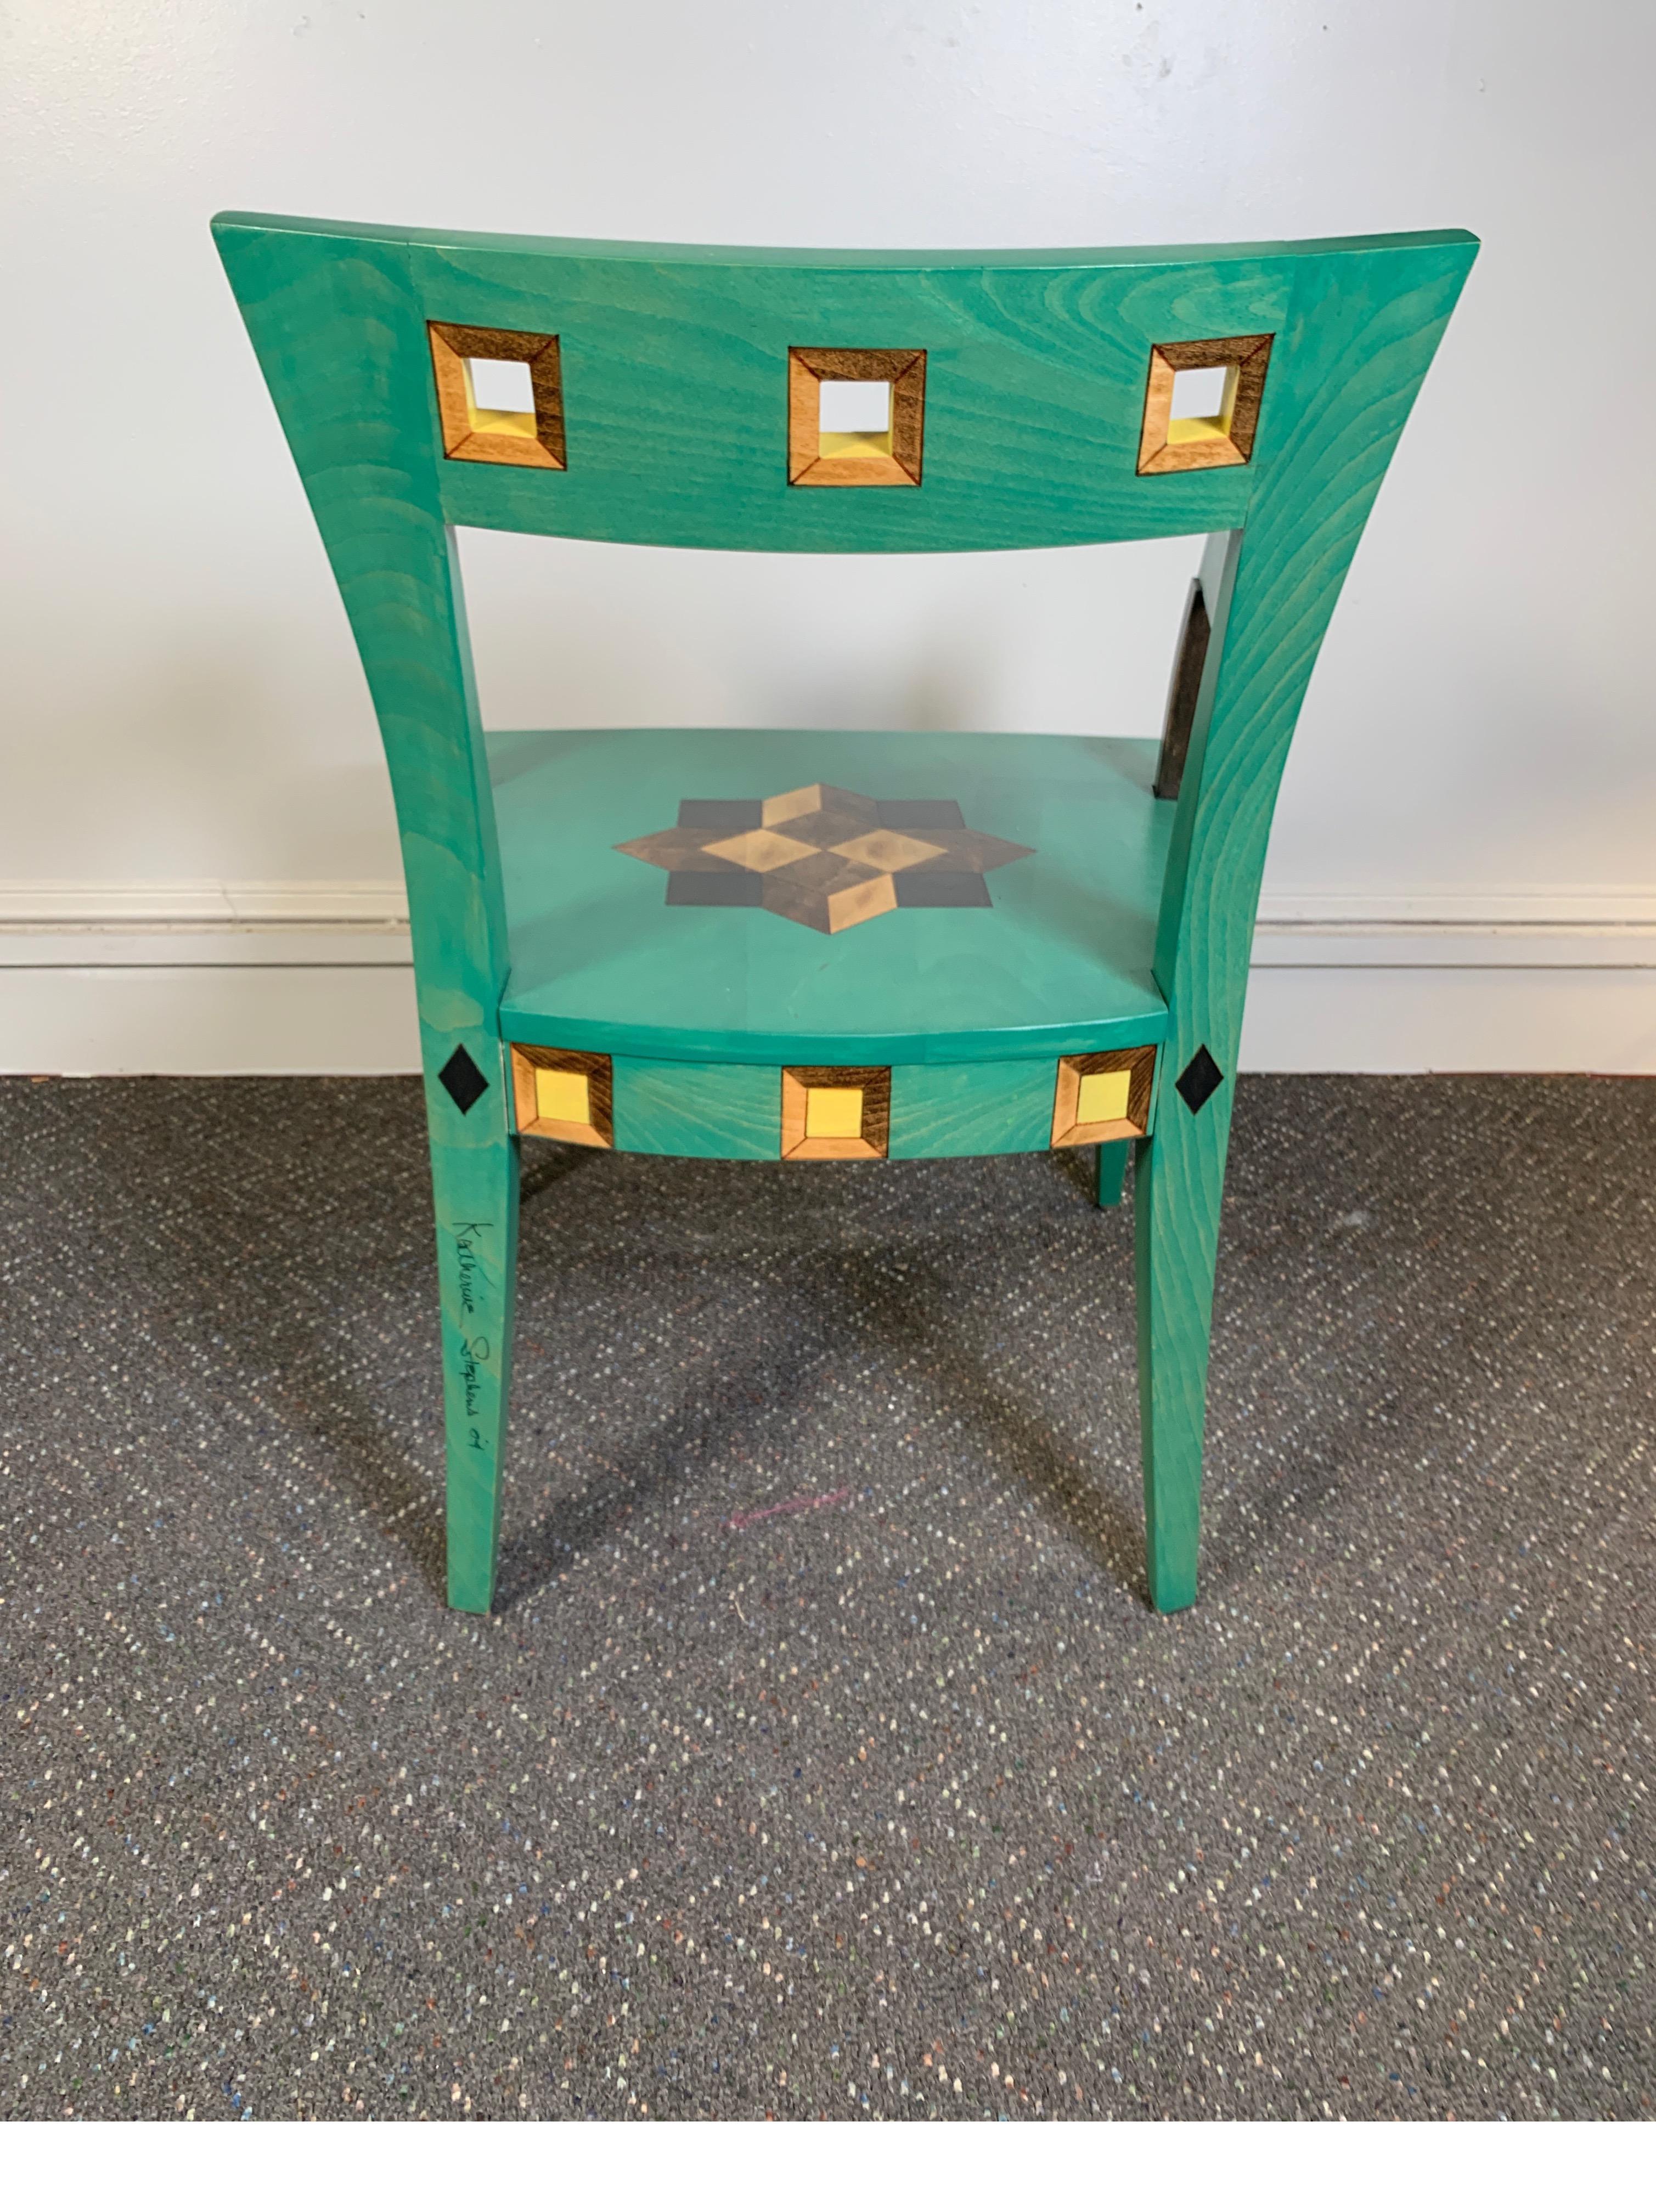 Contemporary Hand Painted Chair Designed by Katherine Stevens